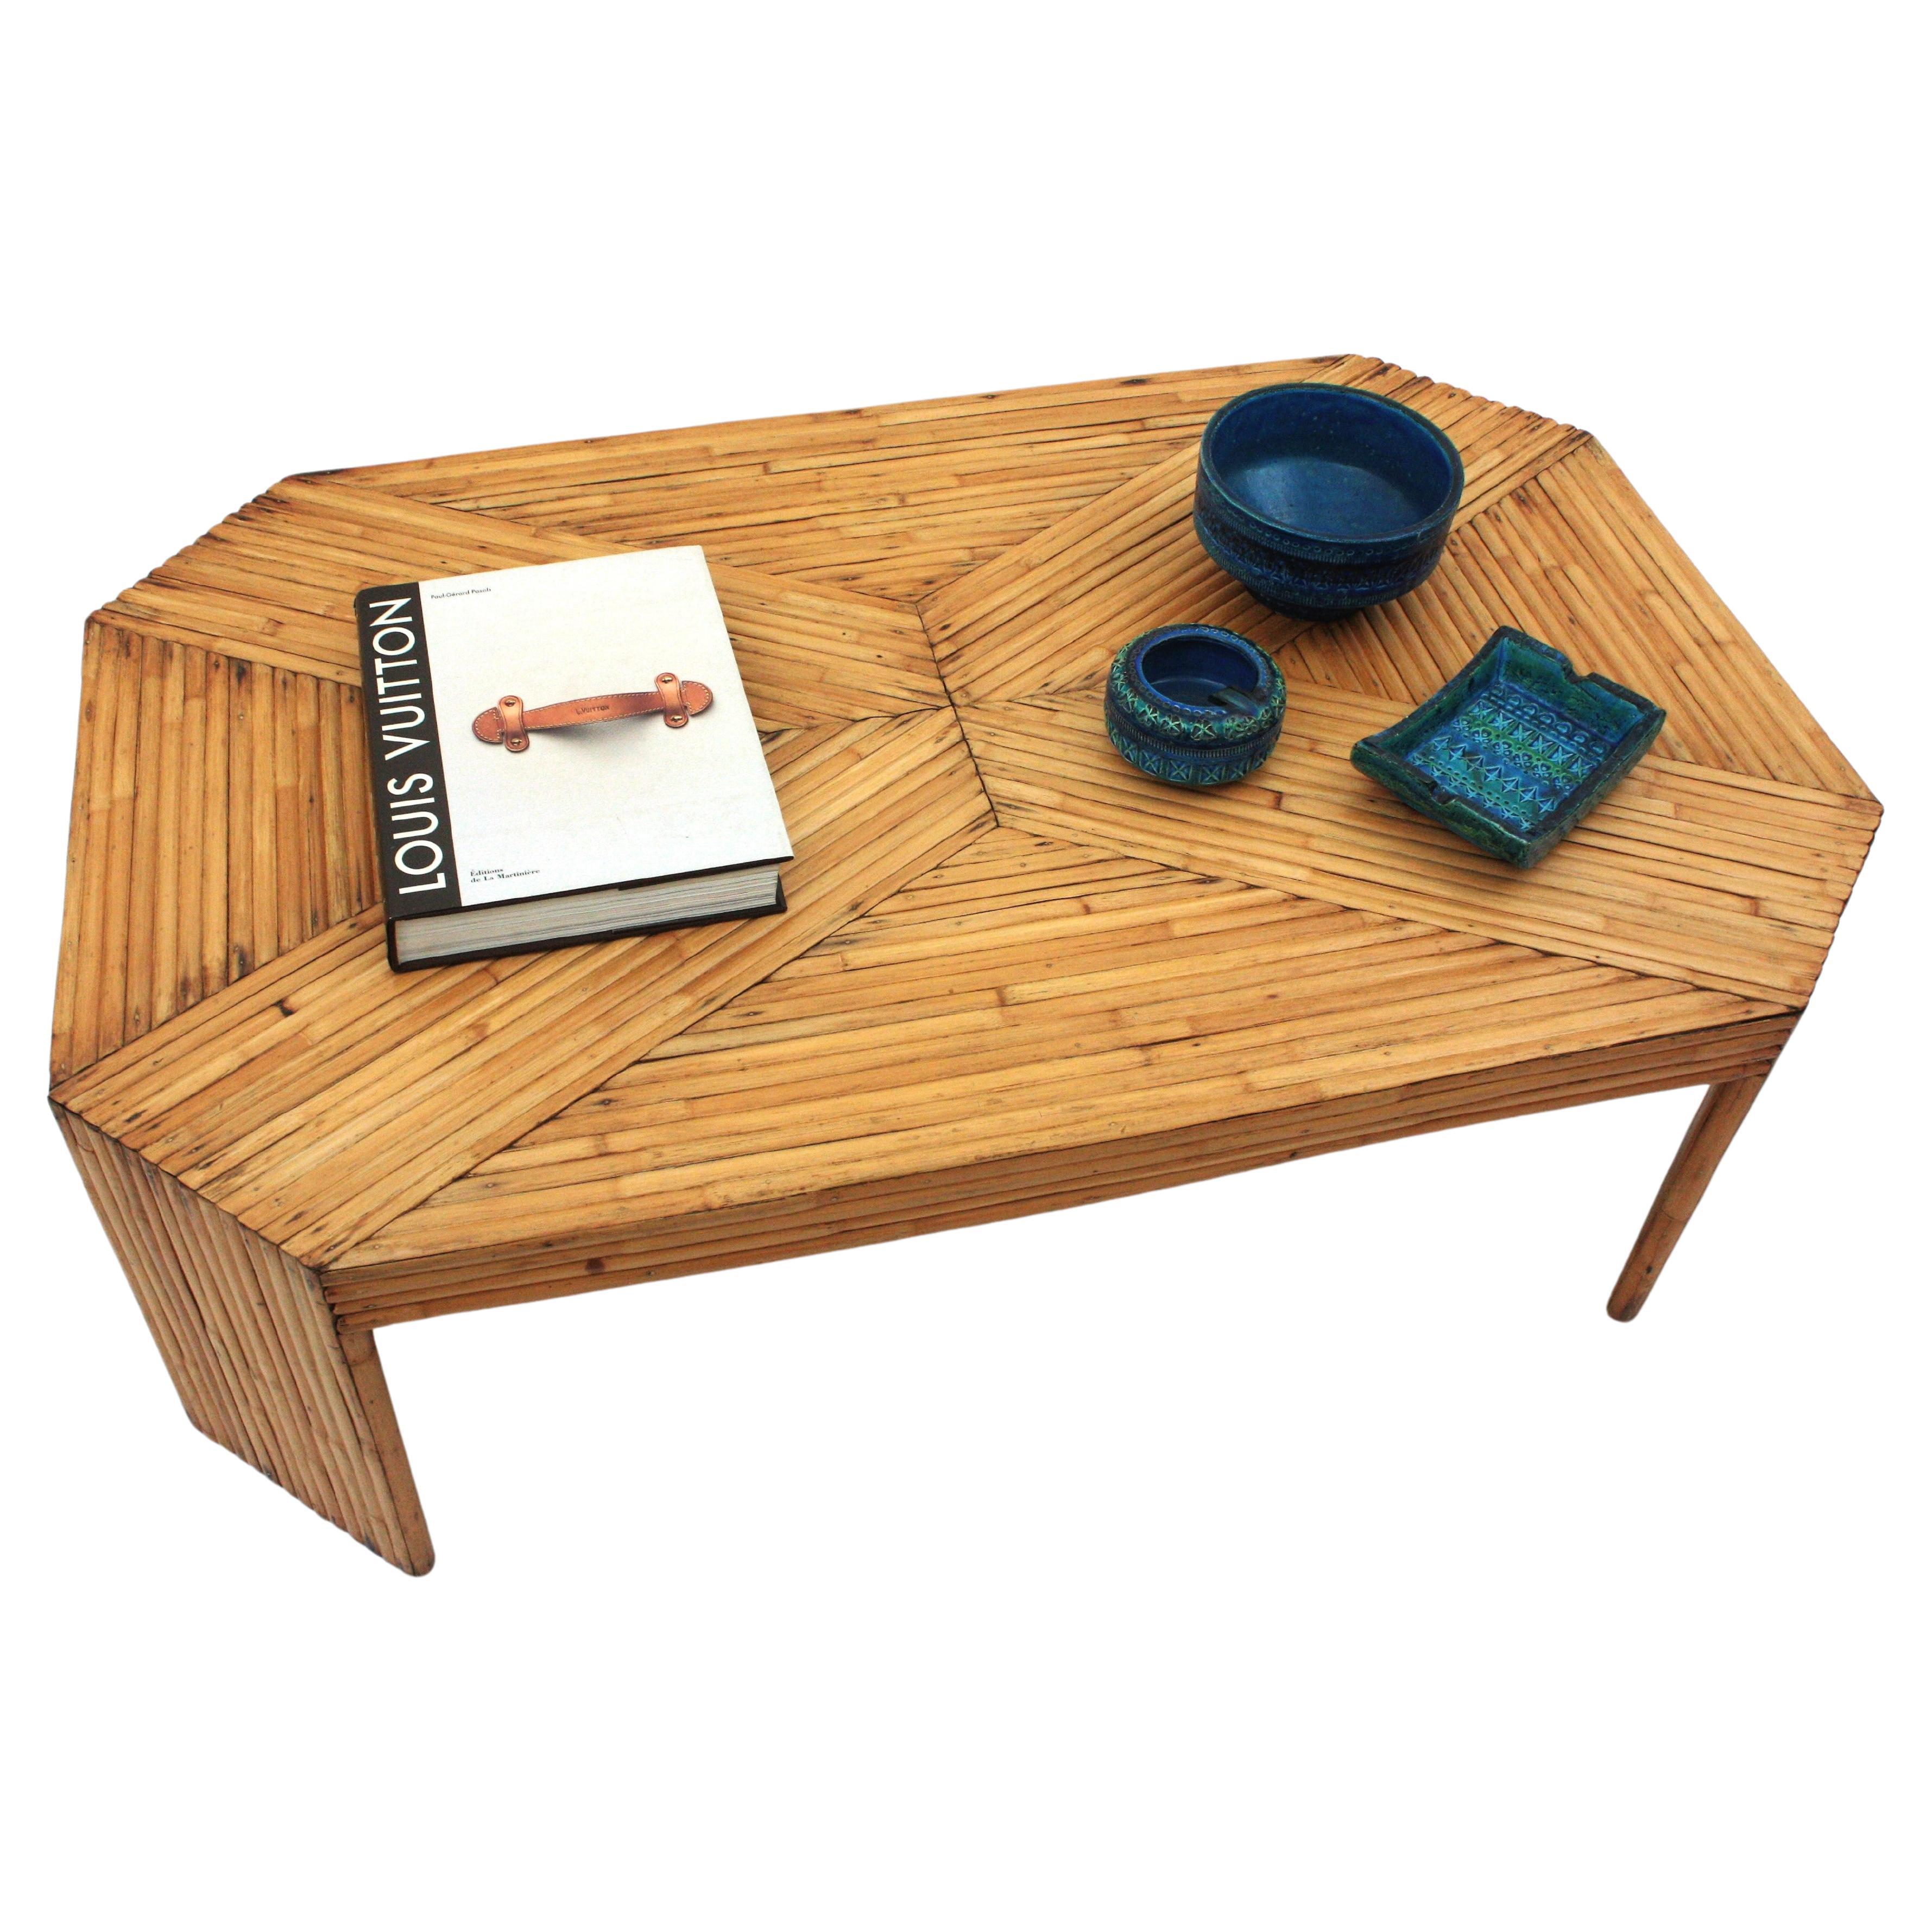 Extra Large Octagonal Split Reed / Pencil Reed Large Coffee Table, Italy, 1960-1970.
Amazing split bamboo low table made in the manner and style of Gabriella Crespi and Paul Frankl.
This eye-catching octagonal coffee table is all covered with split